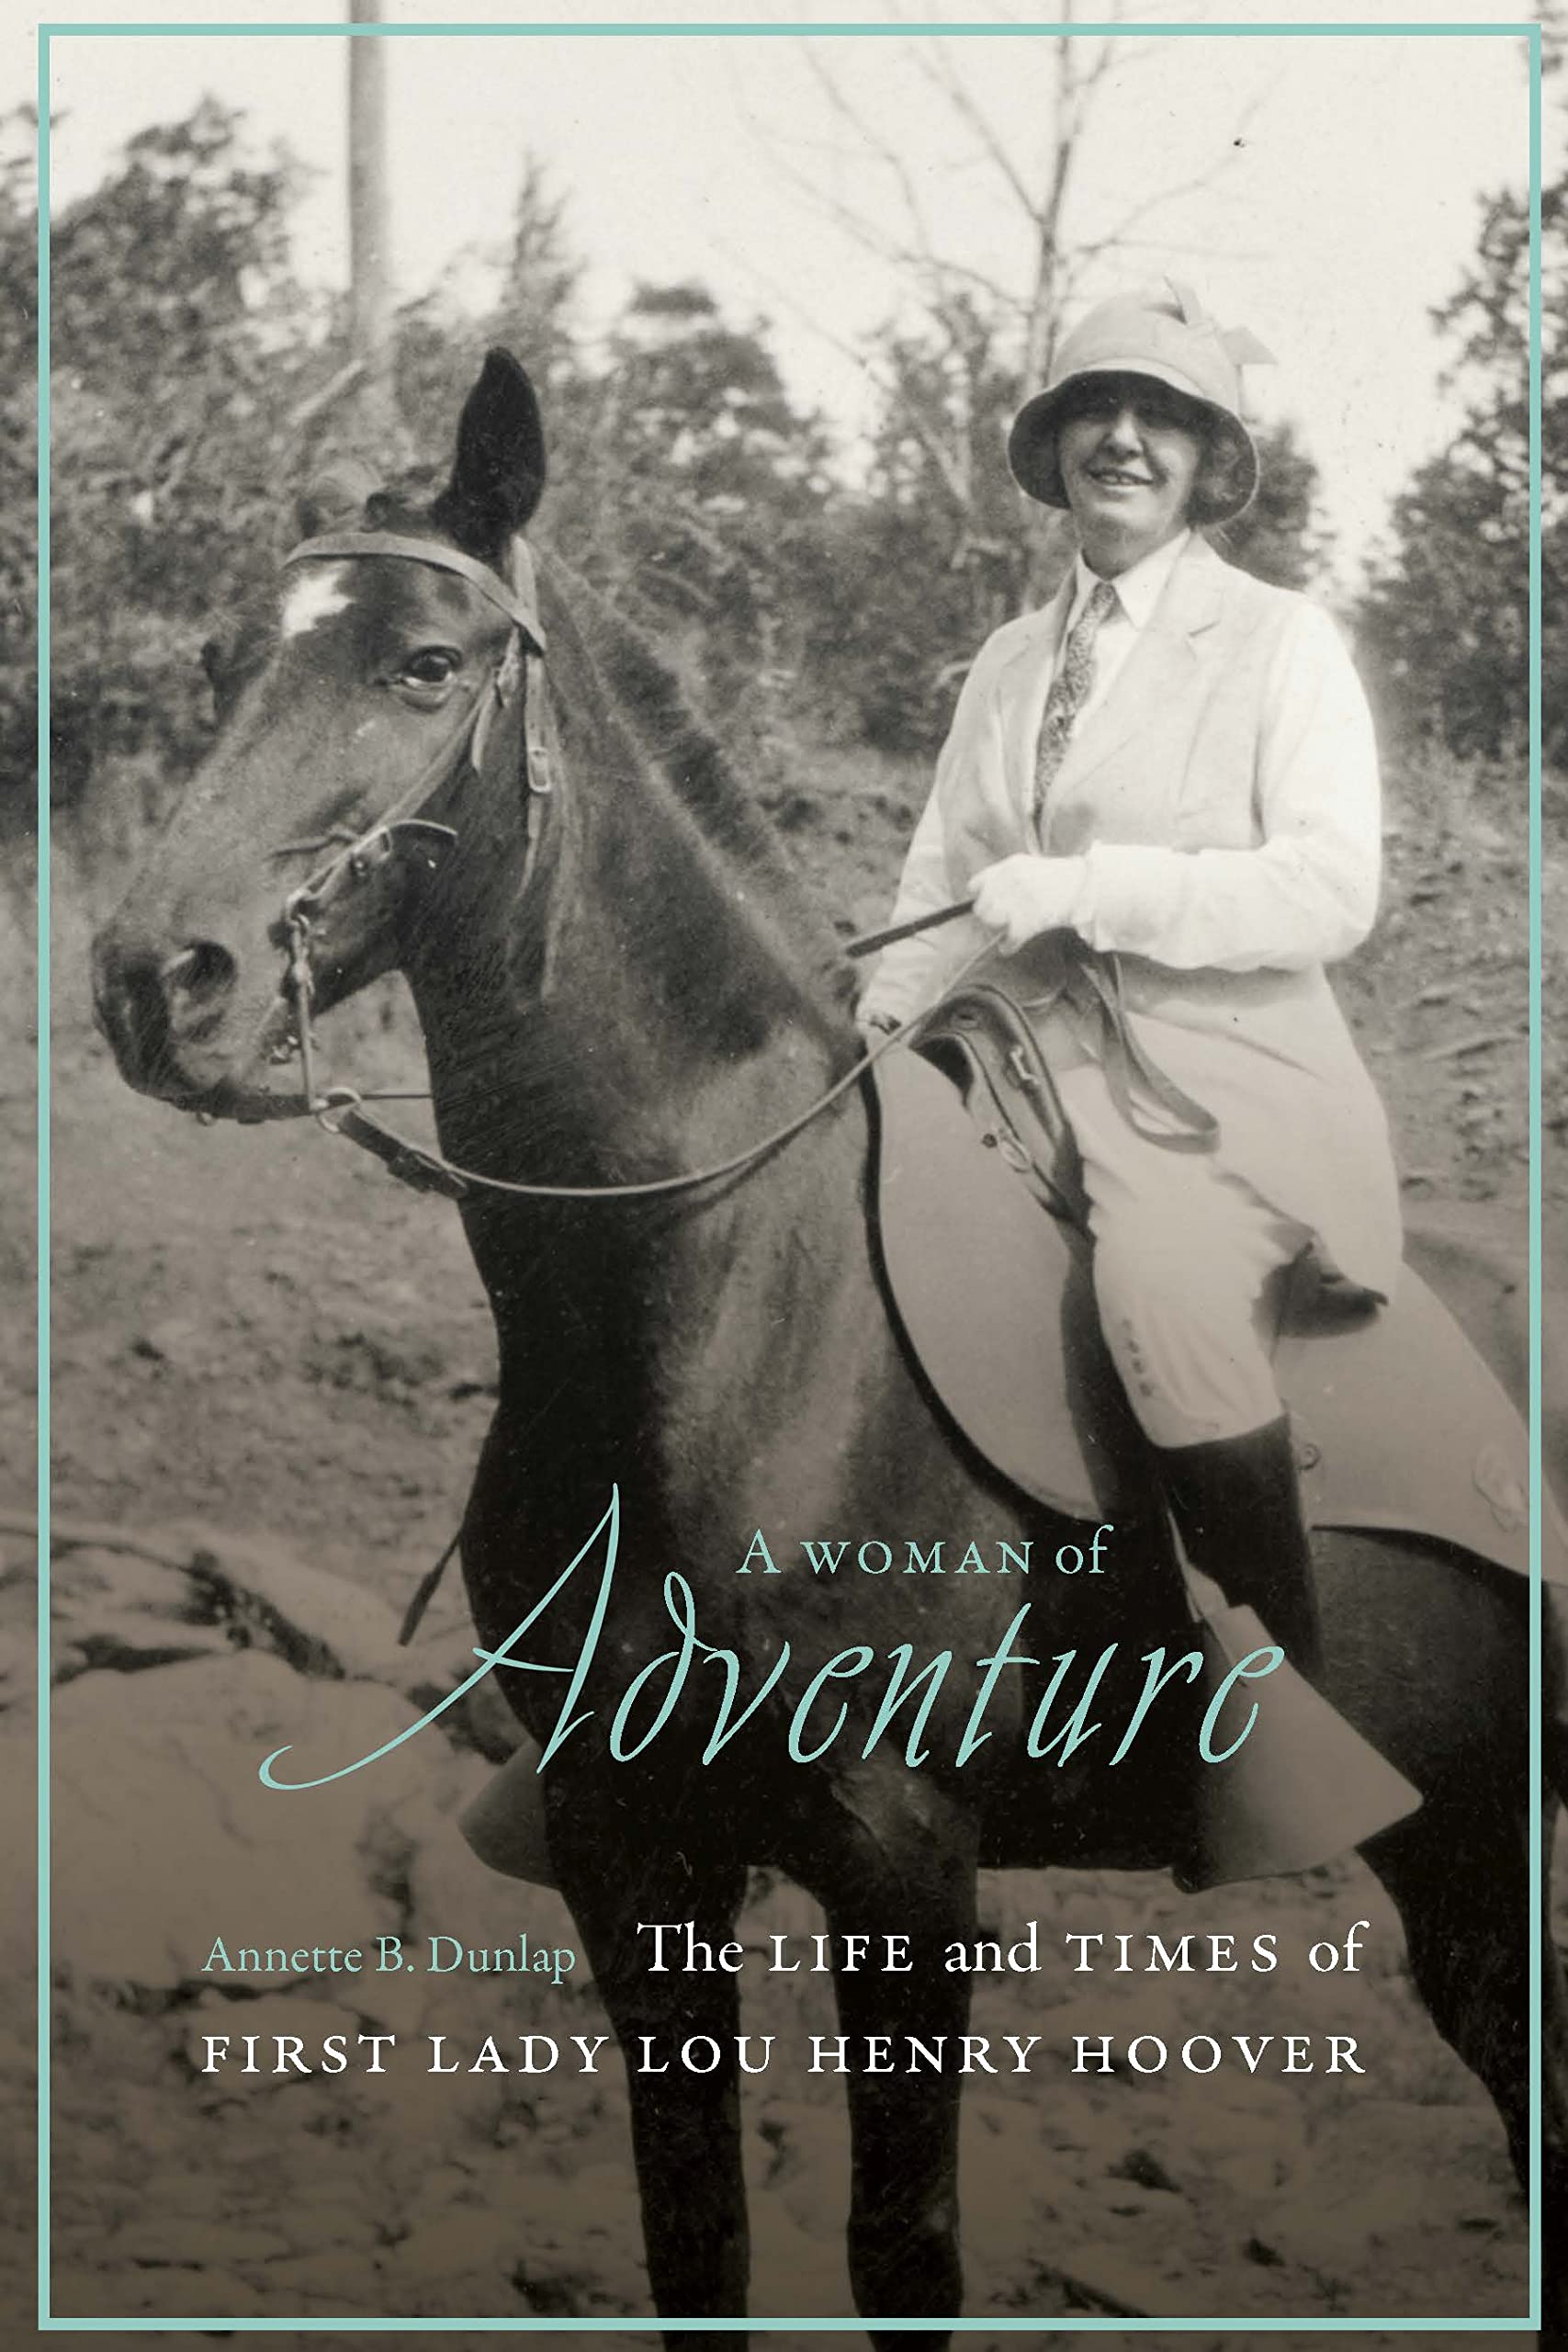 A Woman of Adventure by Annette B. Dunlap